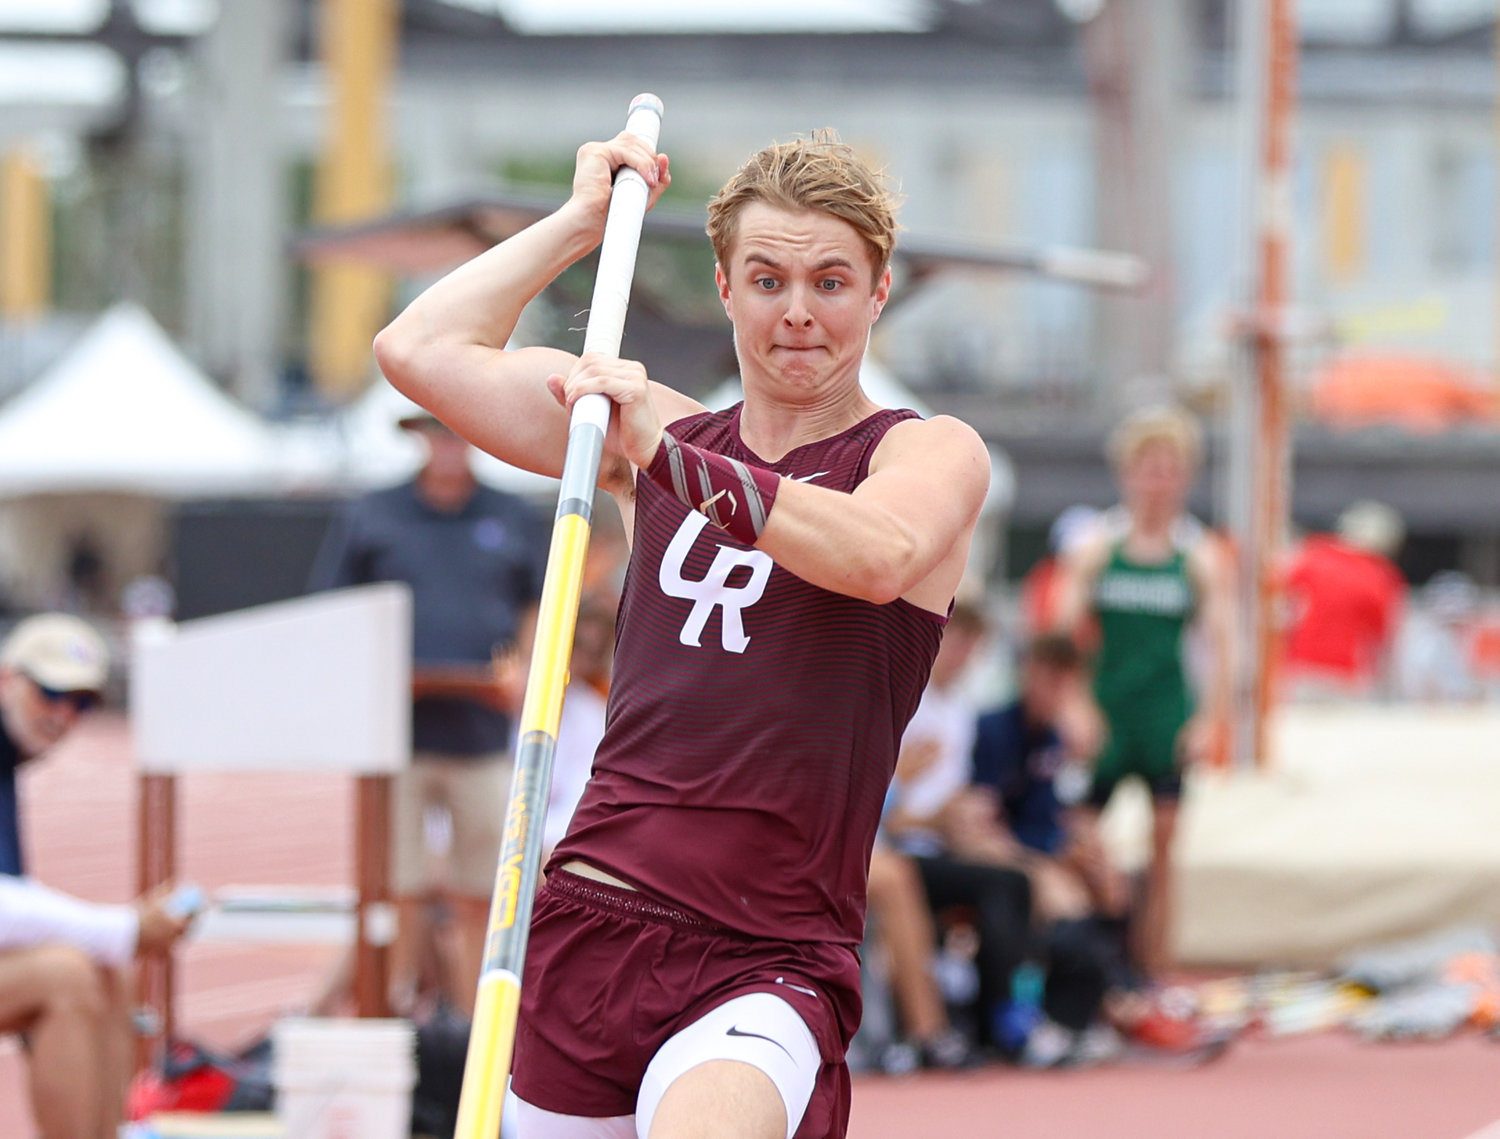 William Saxman of Cinco Ranch High School competes in the Class 6A boys pole vault event at the UIL State Track and Field Meet on May 7, 2021 at Mike A. Myers Stadium in Austin, Texas. Saxman finished fourth in the event with a vault of 15-6.00.